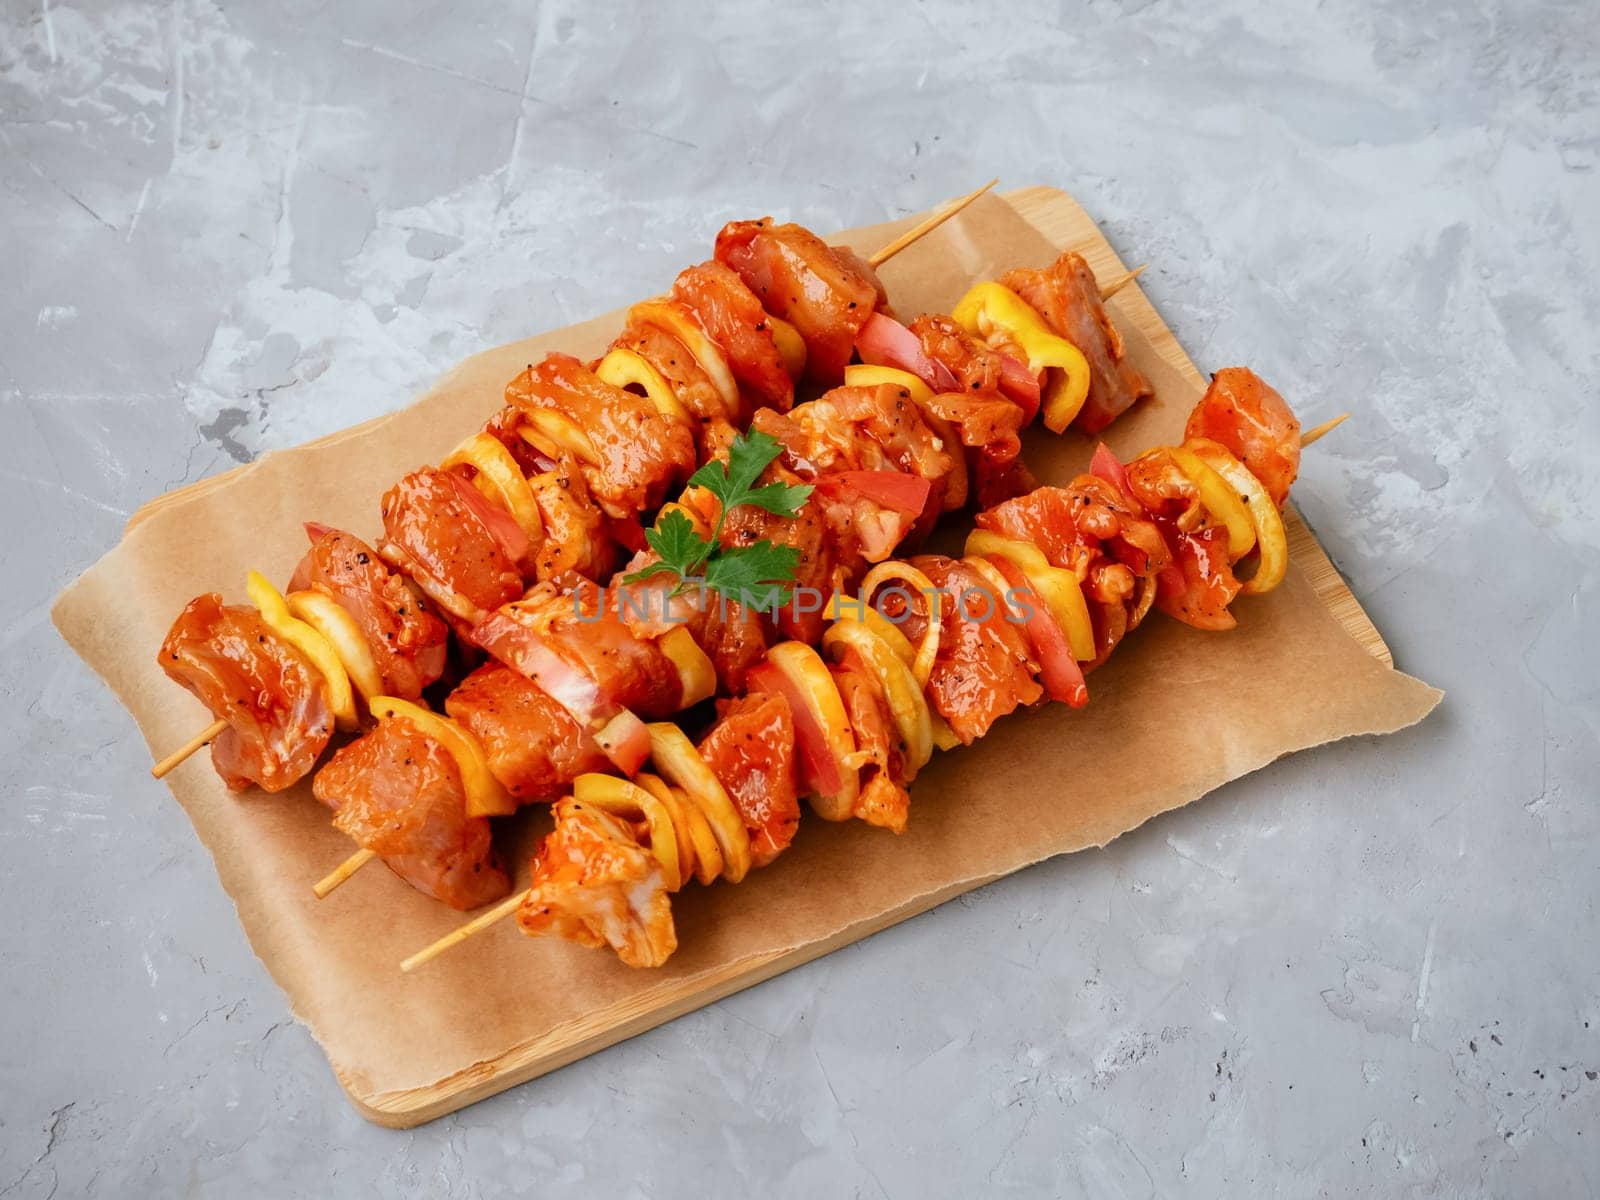 Raw meat in a marinade with spices on cutting board. Uncooked marinated and rubbed chiken or turkey shish kebabs on skewers with onion, pepper and tomato ready for grilling or BBQ. Soft focus